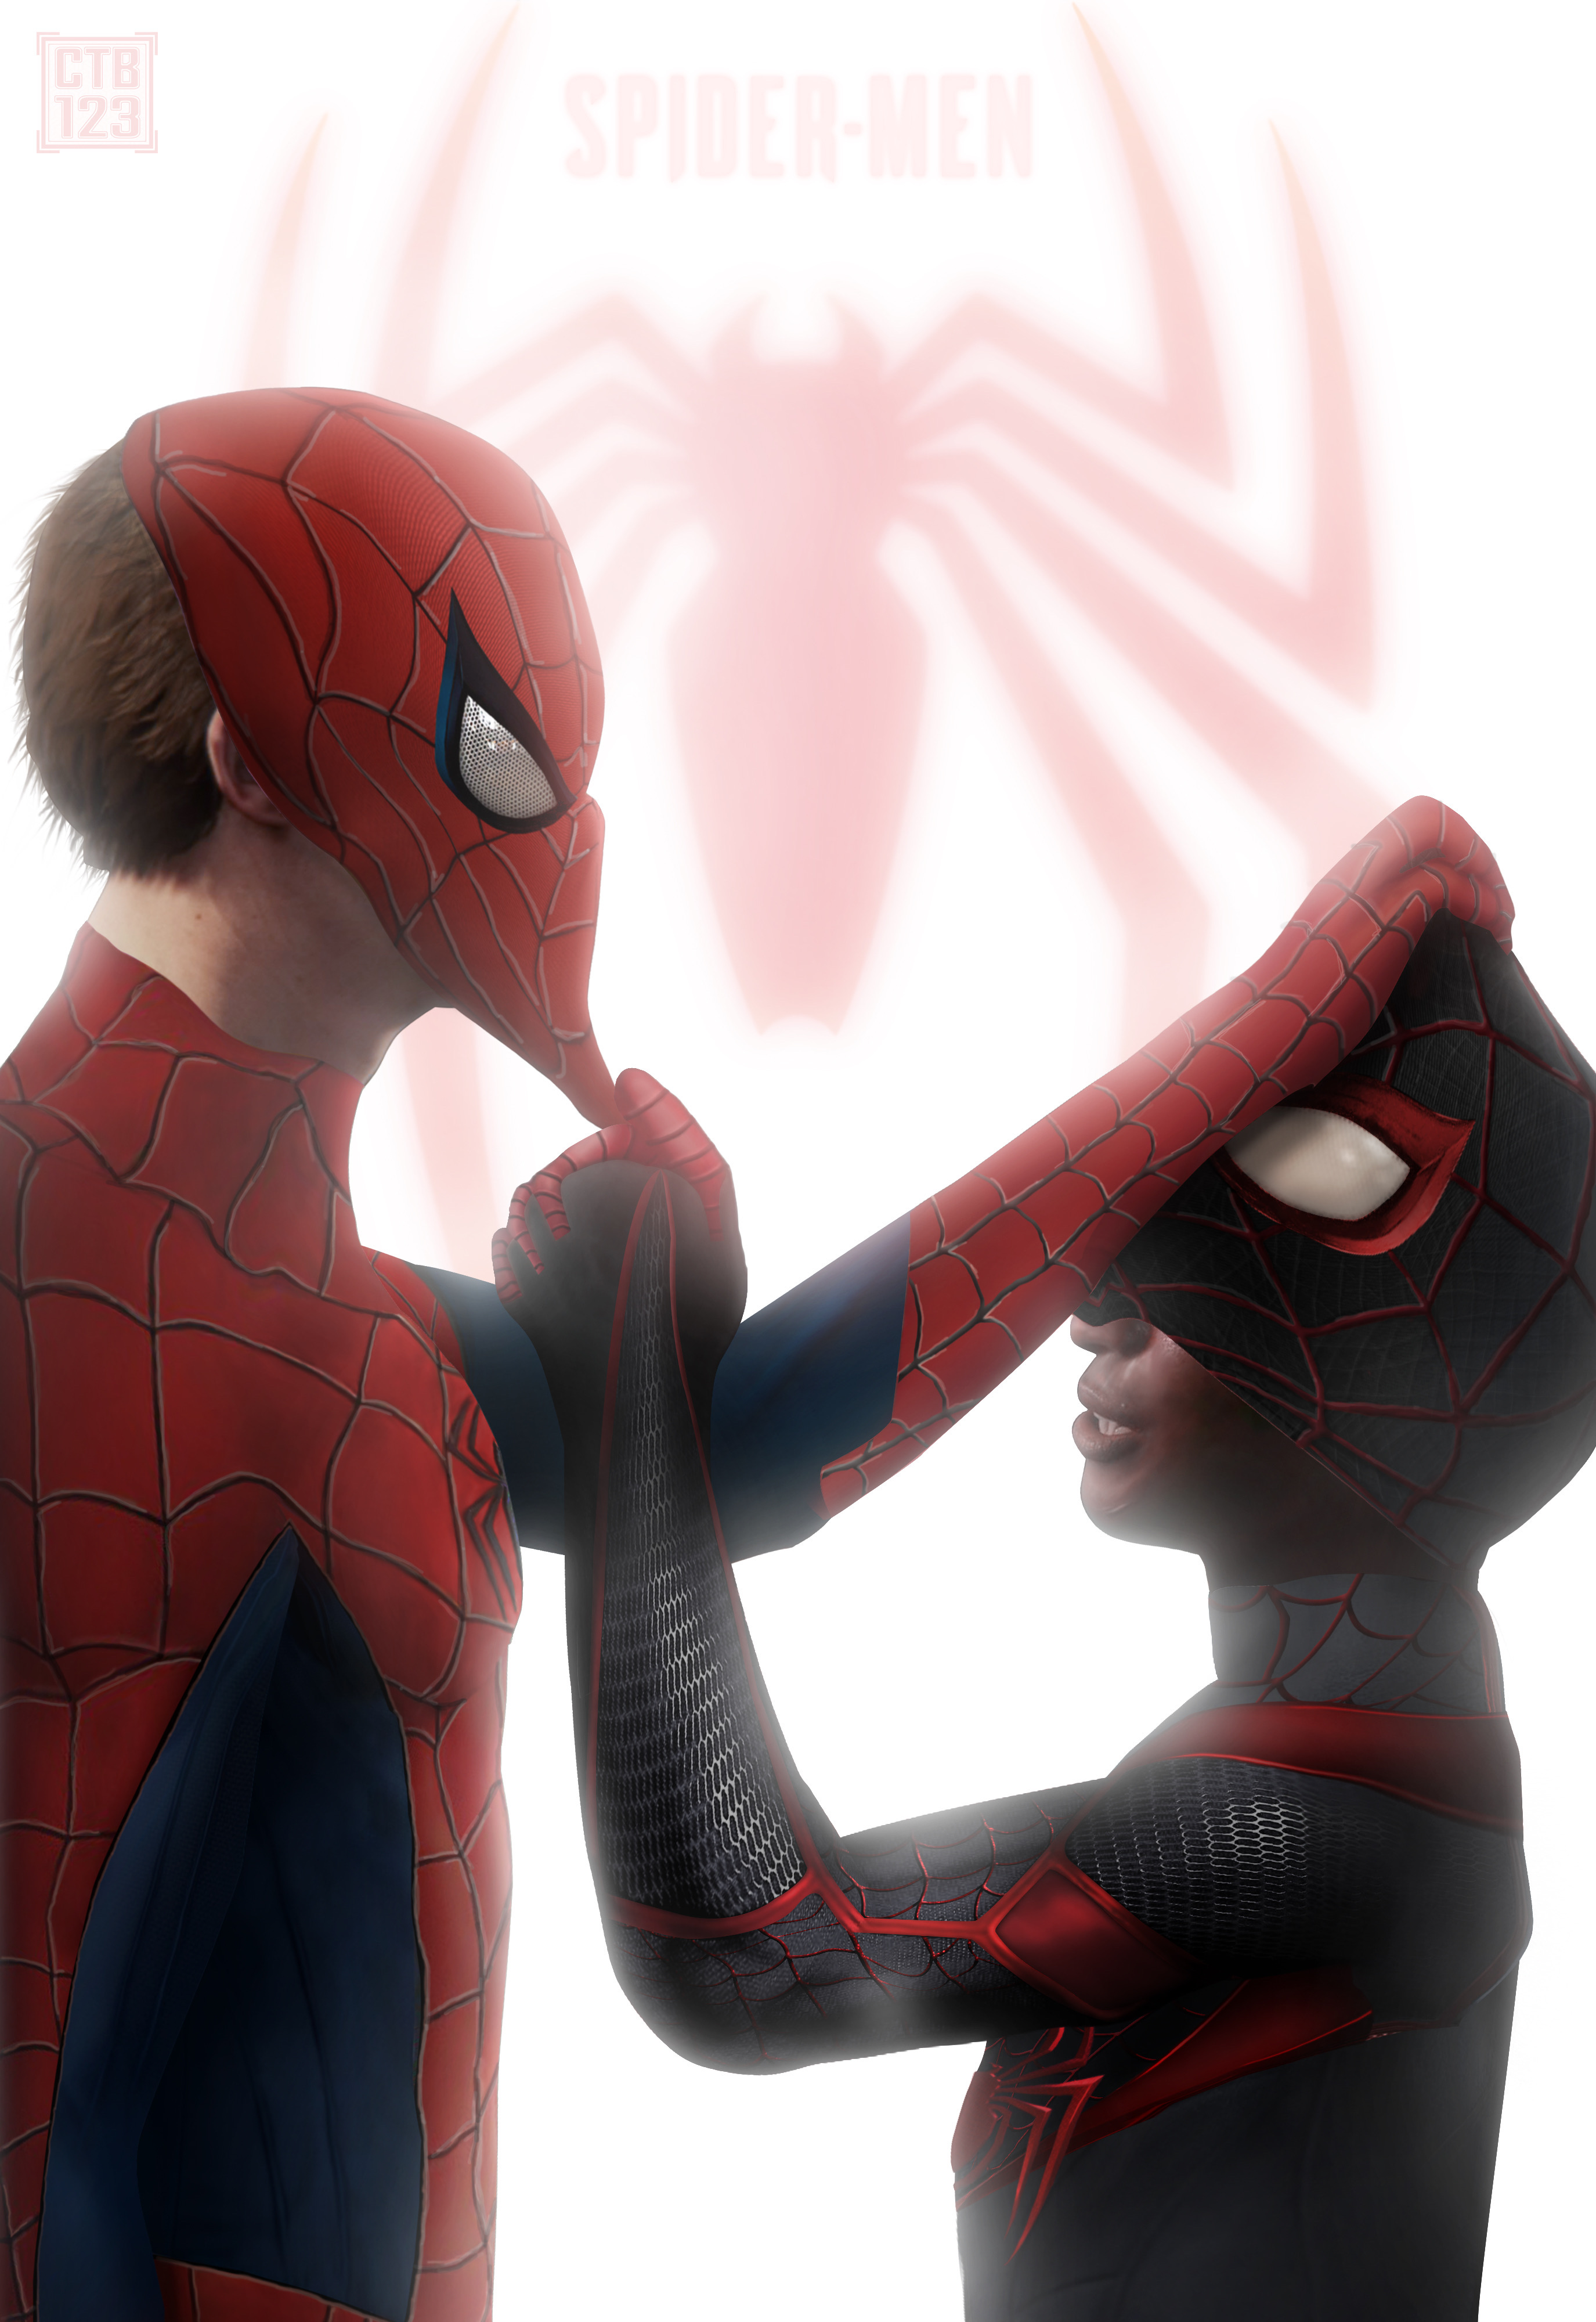 Miles And Spider-Man ps5 by Kingw777 on DeviantArt